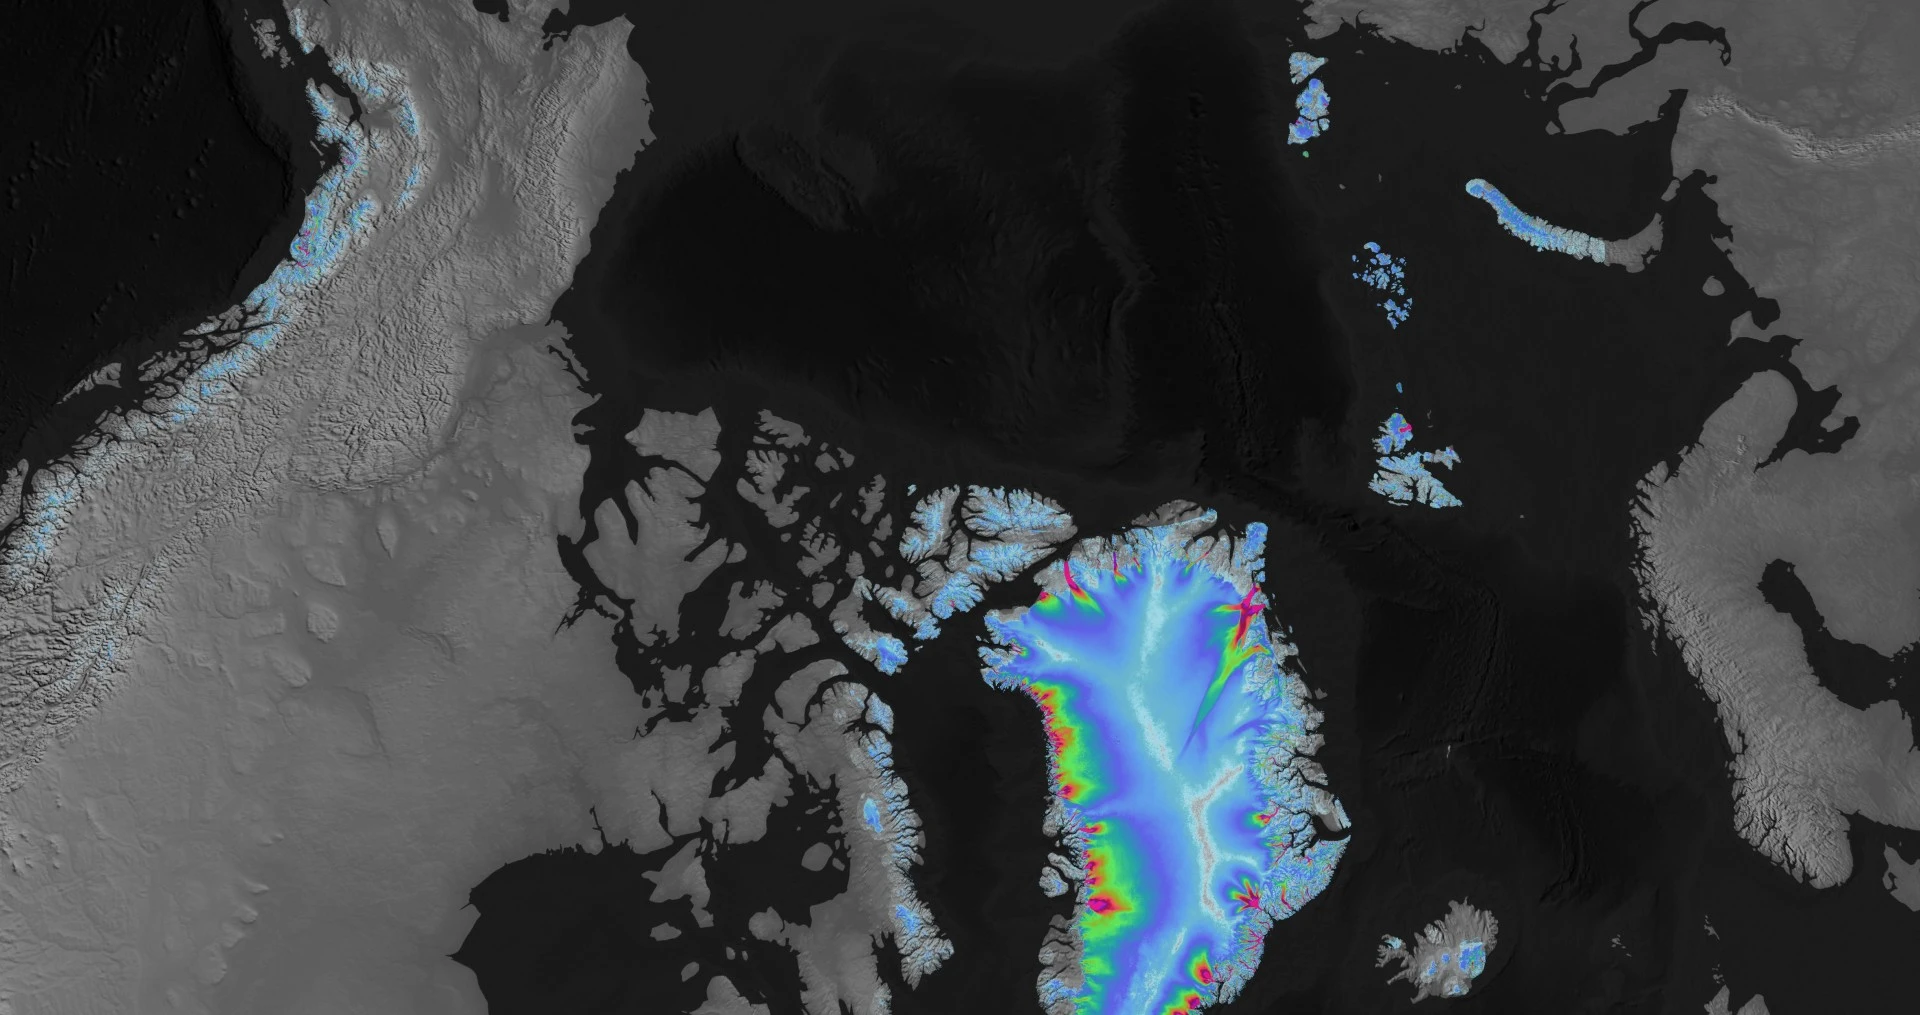 Map of measured glacier surface velocities (m a −1 ) and location